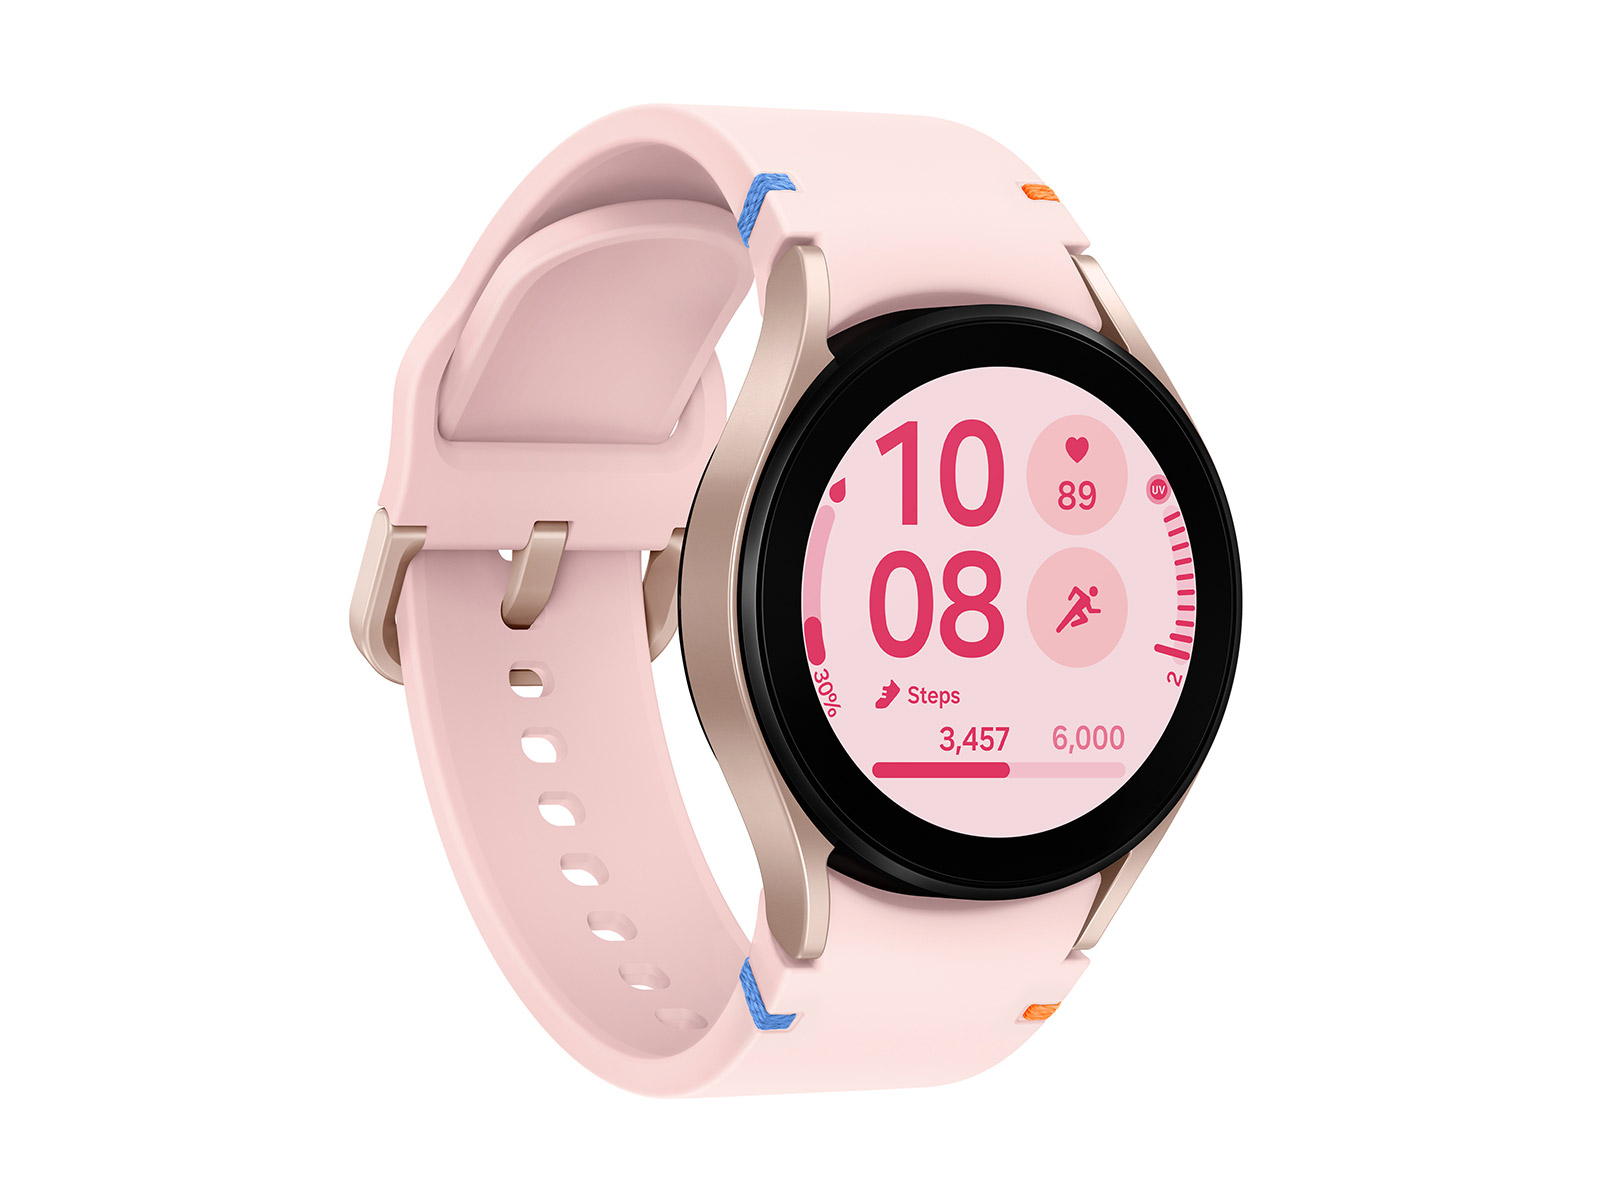 SamsungUS/samsungbusiness/mobile/wearables/smartwatches/gw-fe-pink-gold/SM-R861_003_L_Perspective_Pink_Gold_1600x1200.jpg